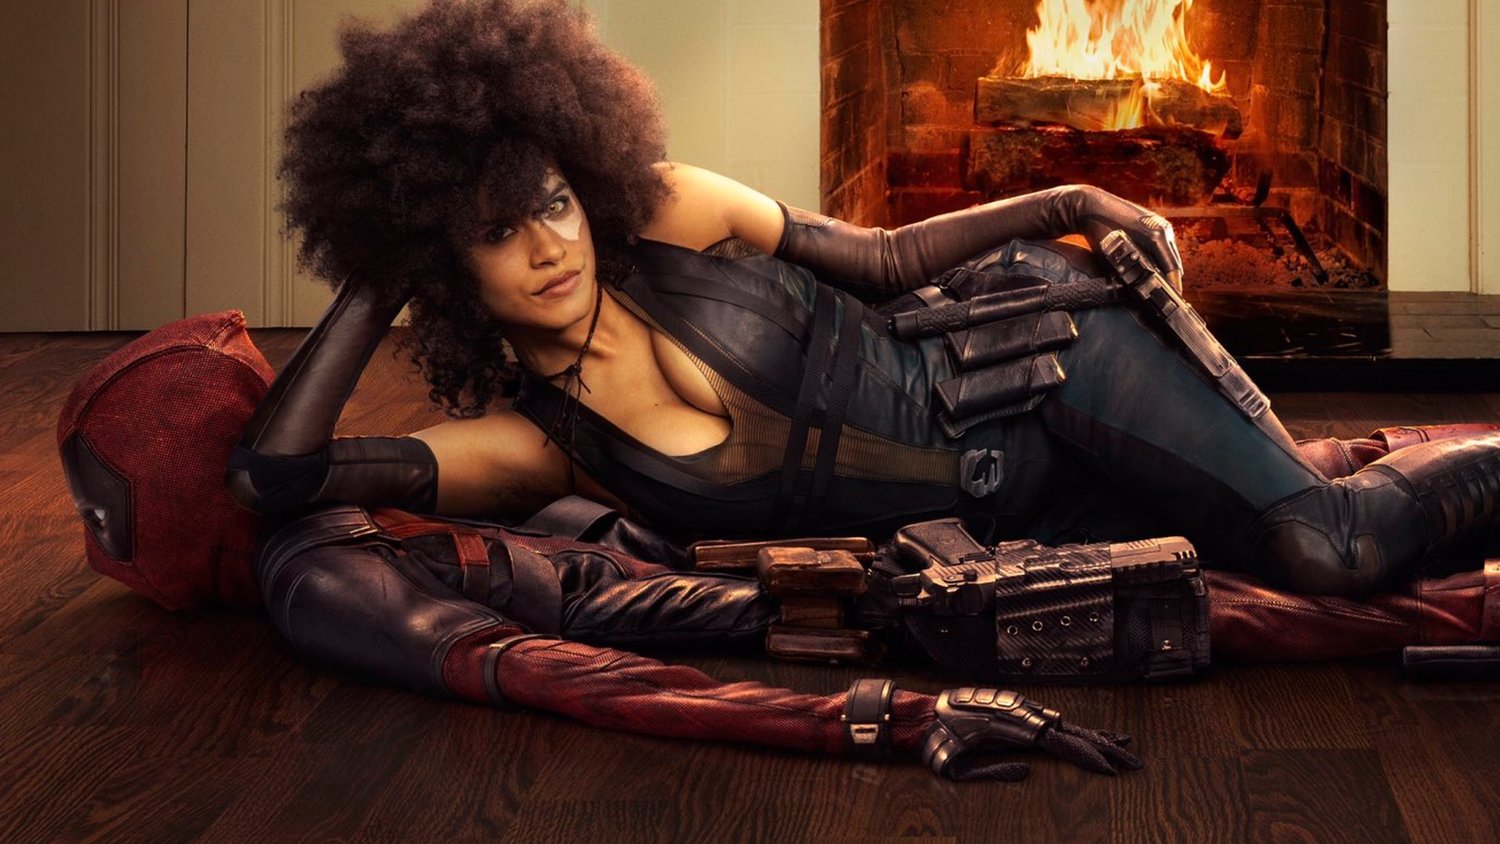 Performance Rose color Fly kite Here's Our First Look at Zazie Beetz as Domino in DEADPOOL 2! — GeekTyrant